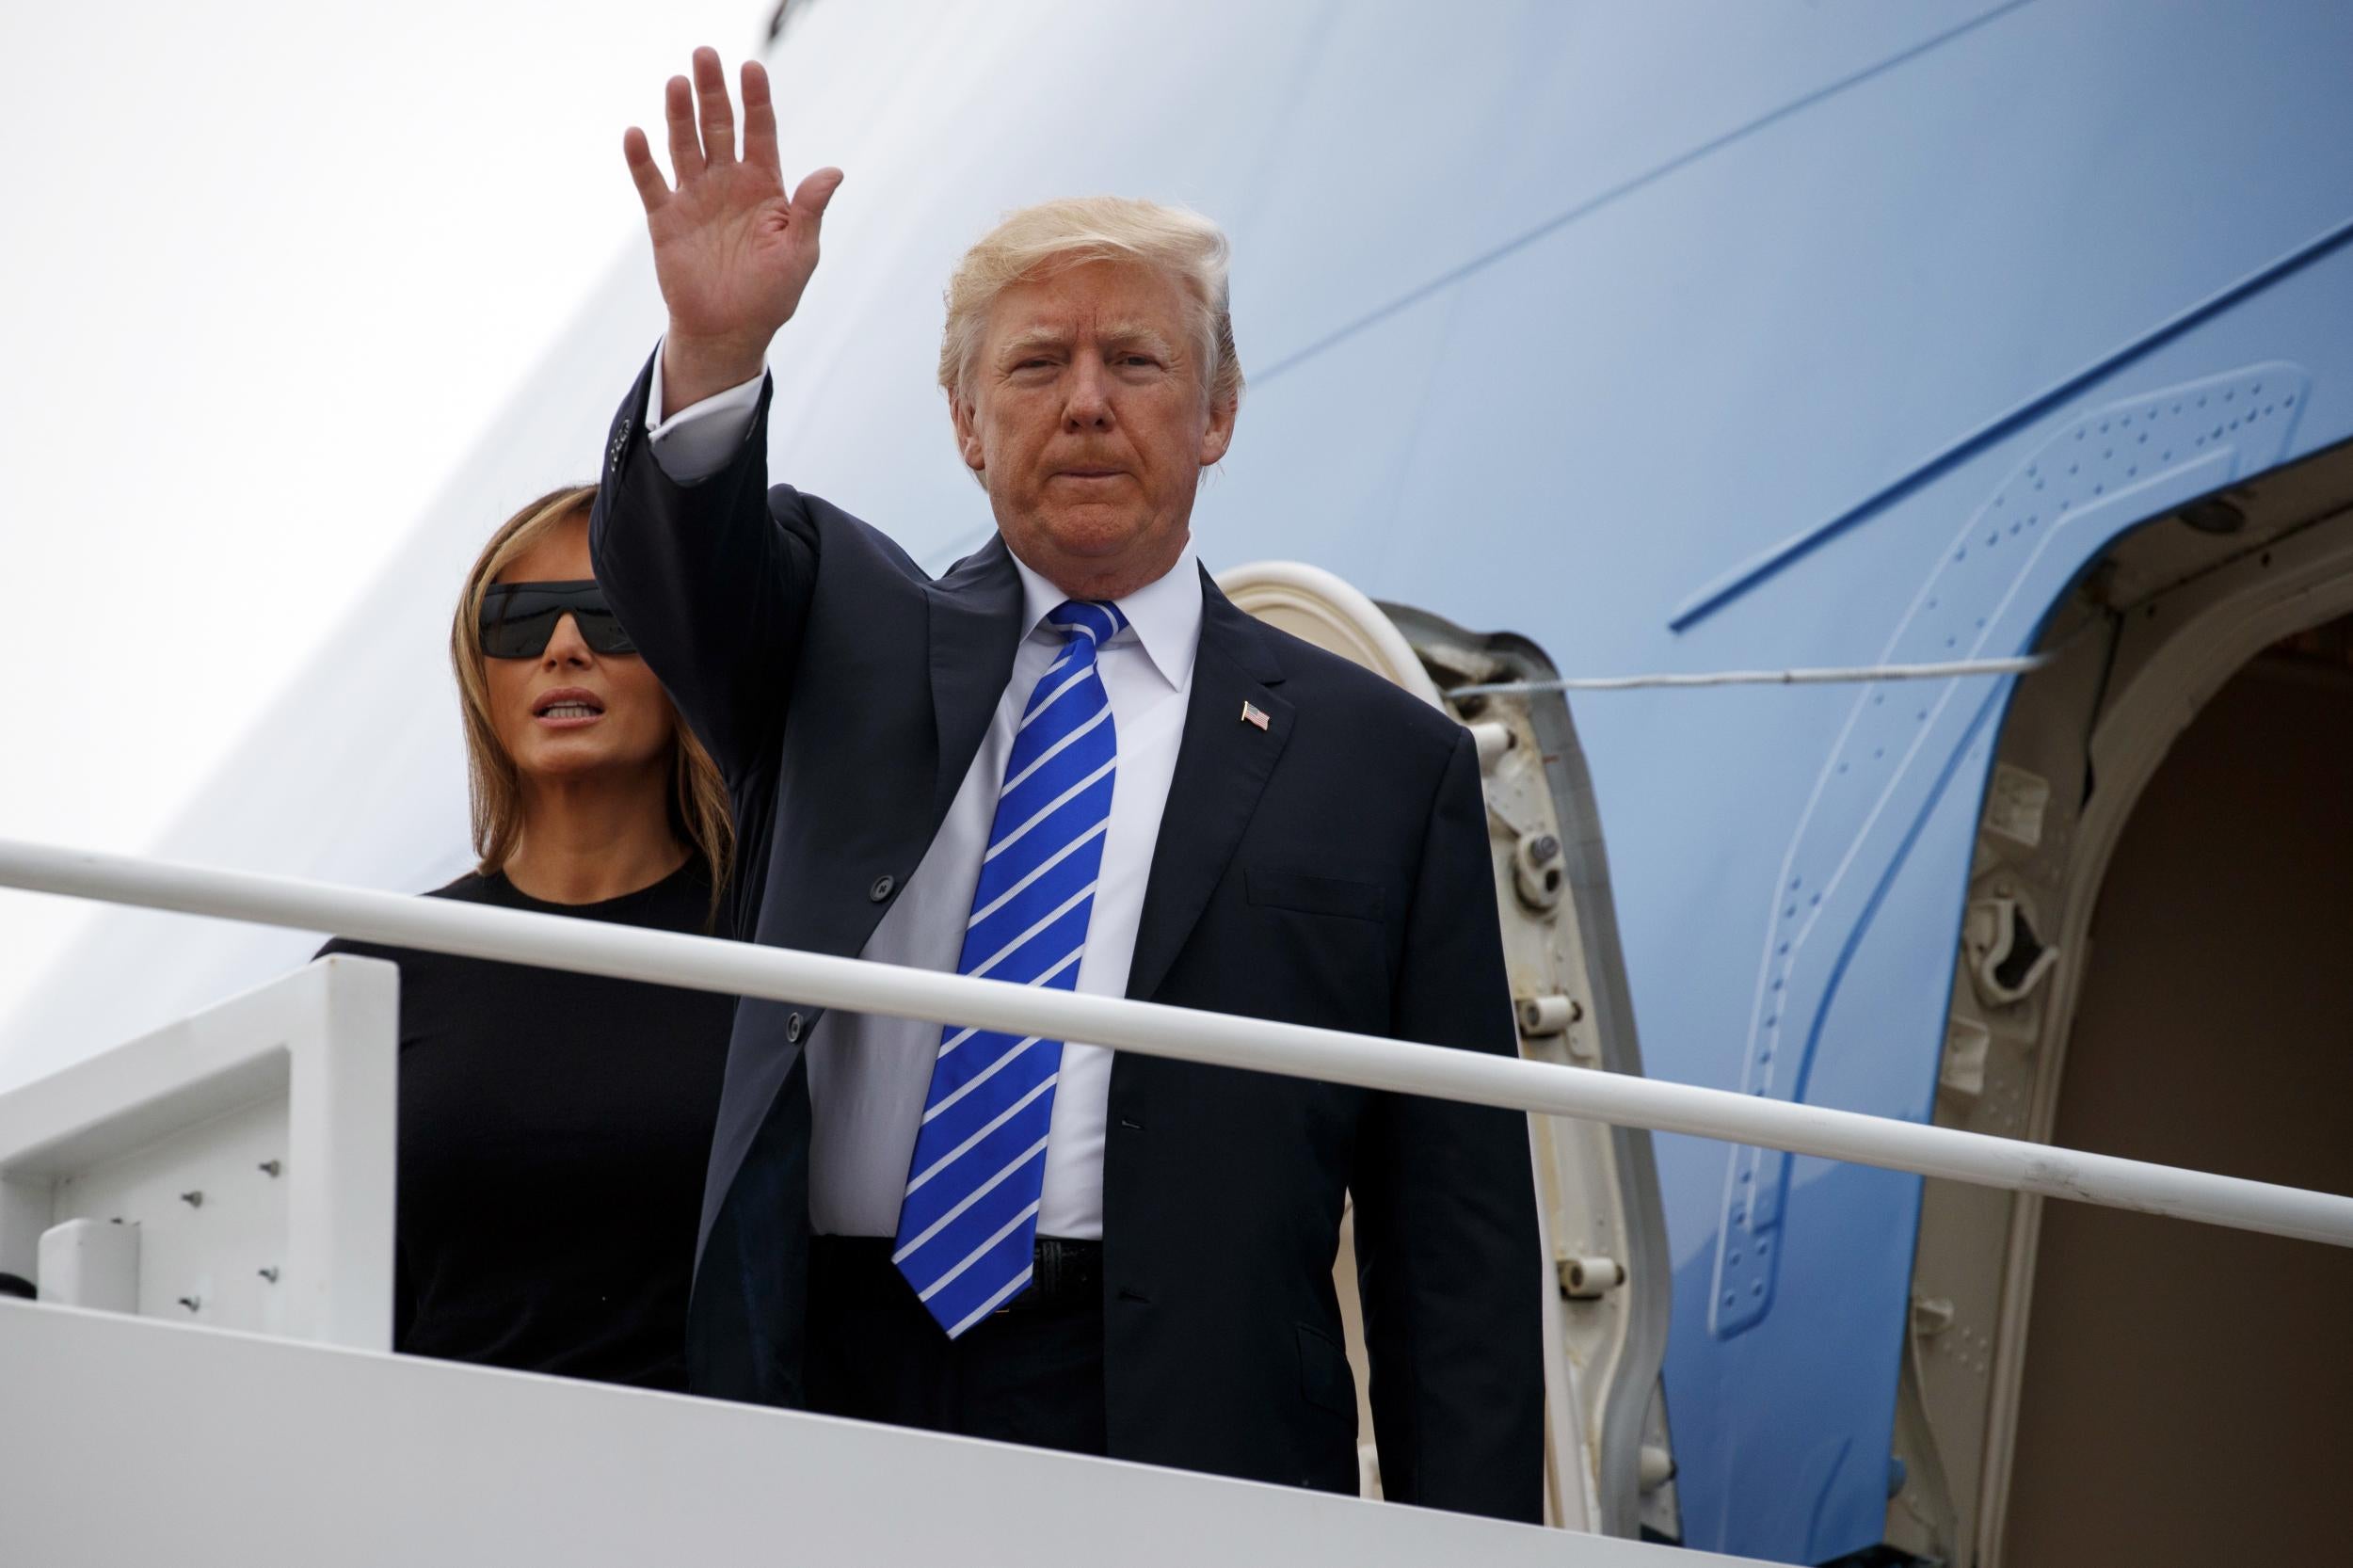 President Donald Trump waves as he boards Air Force One with first lady Melania Trump for a trip to Poland